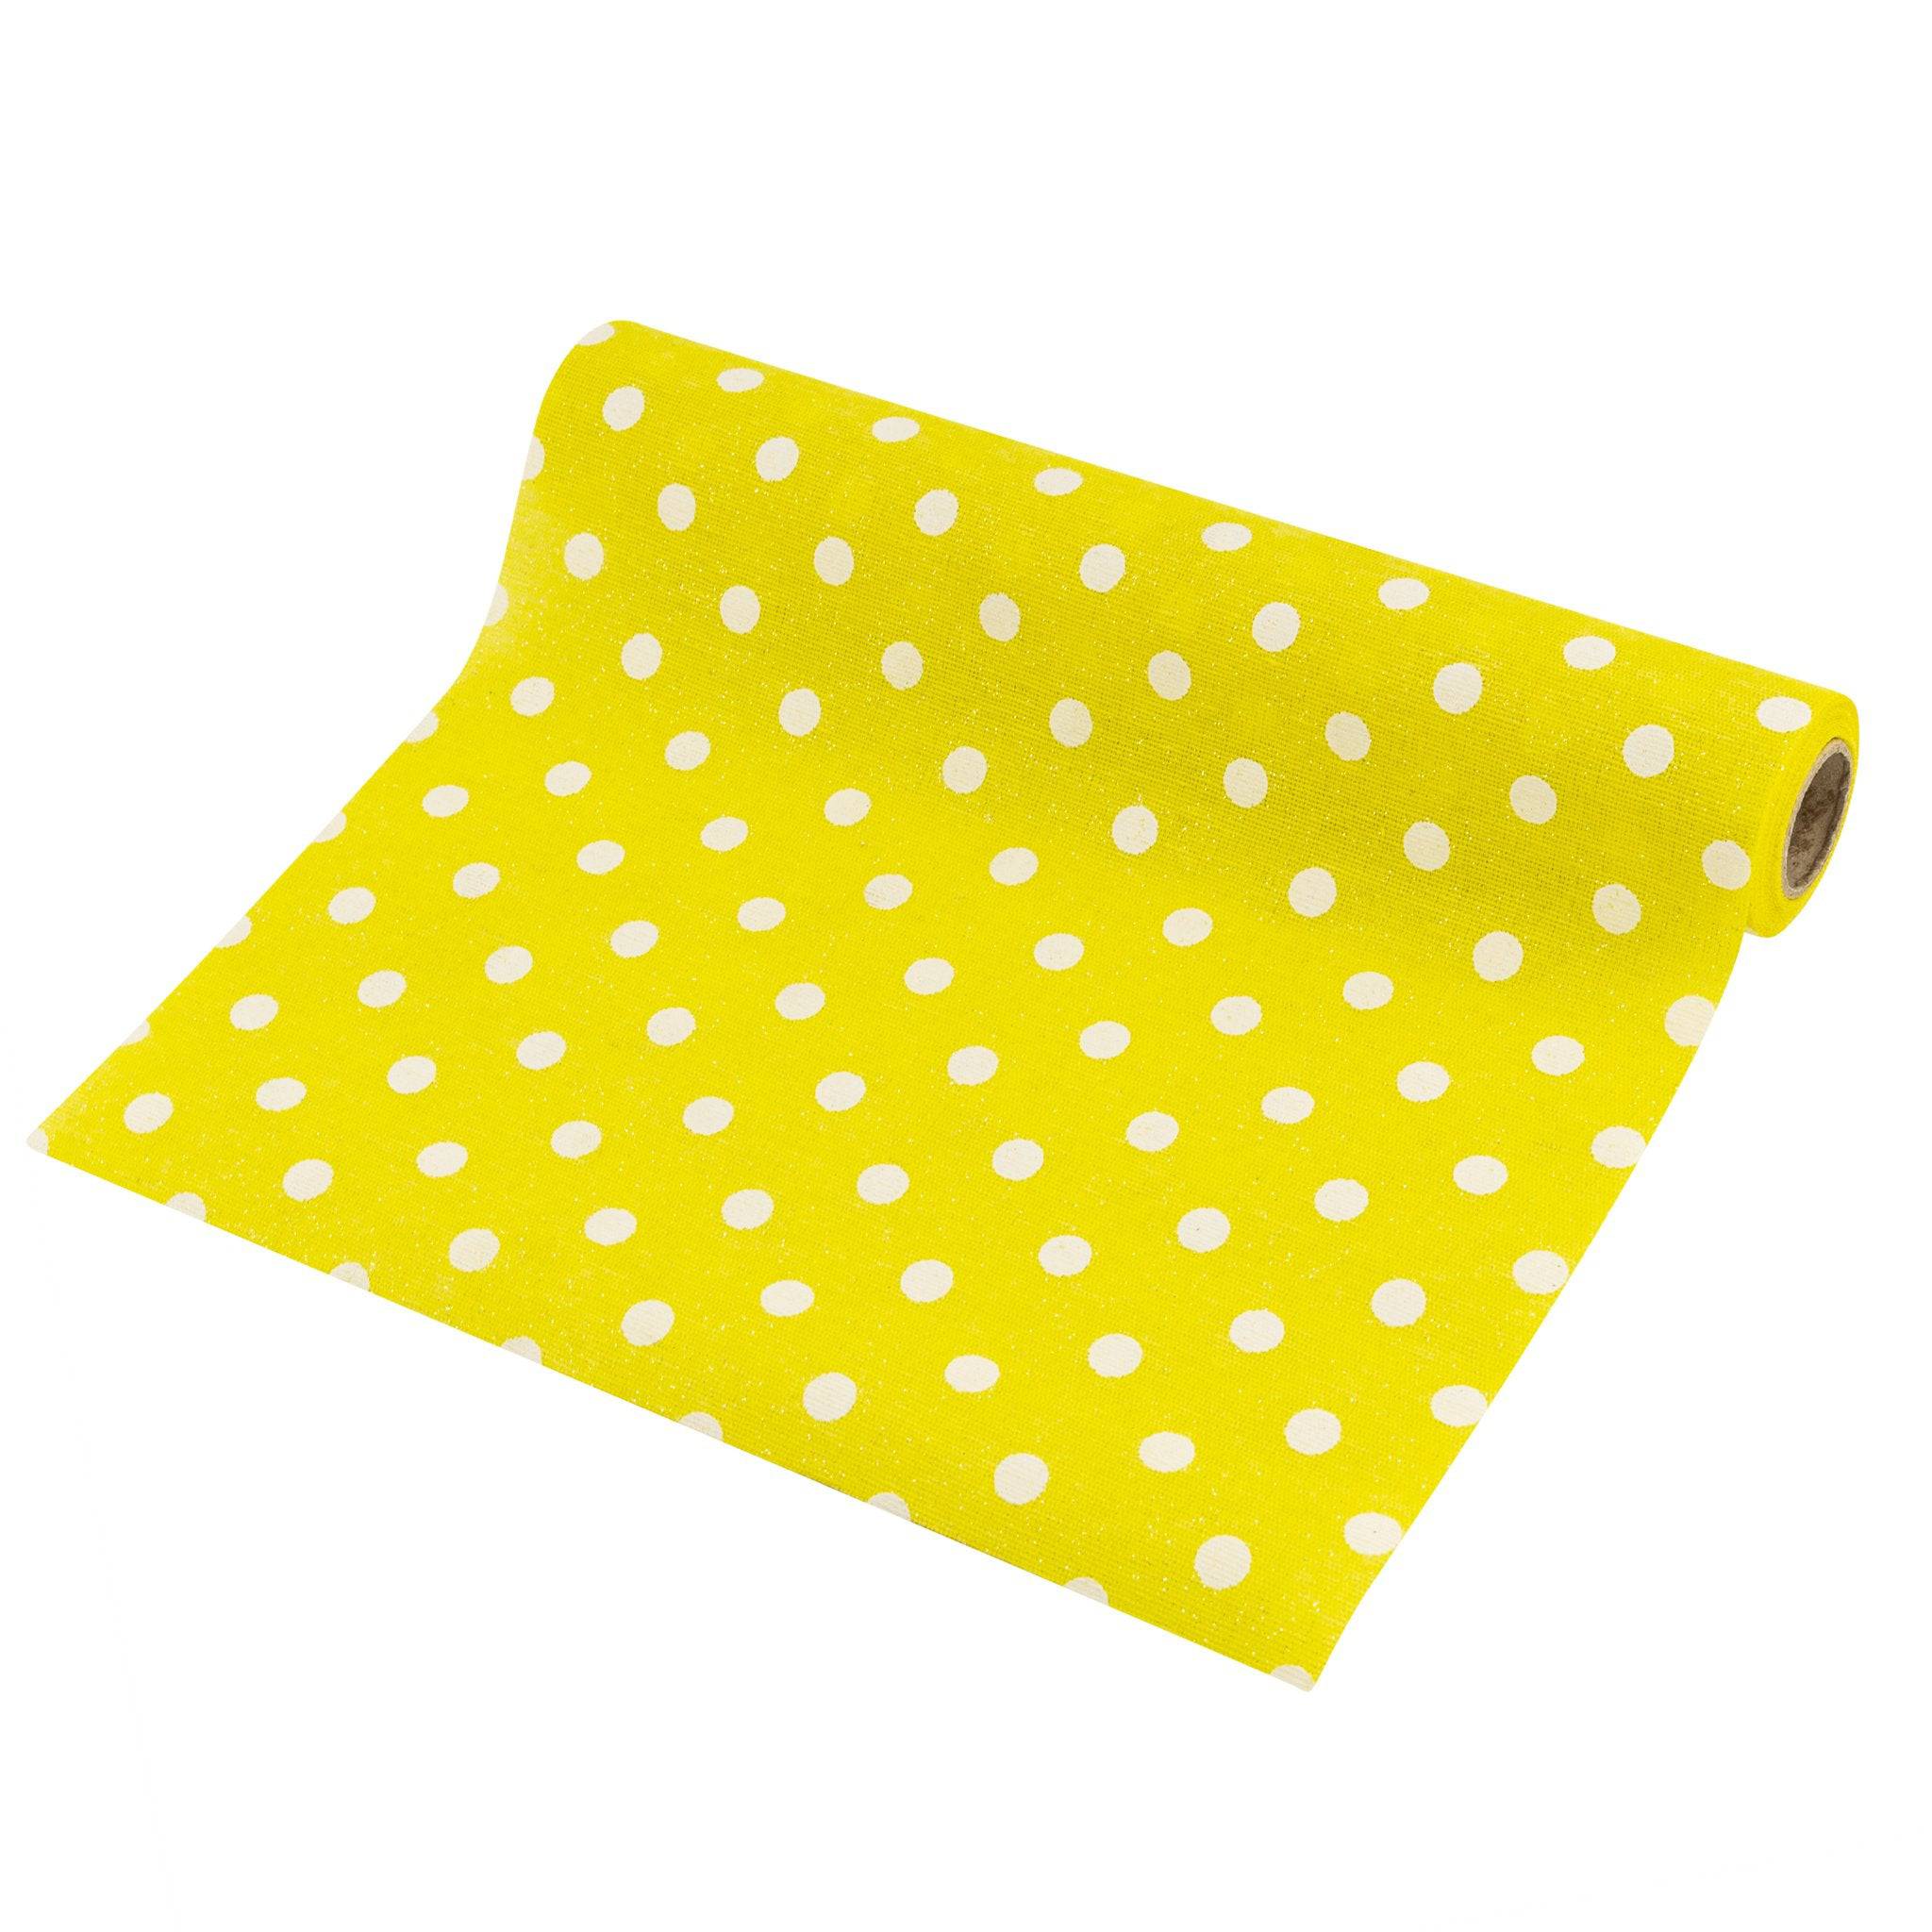 Home Deco Fabric - Yellow Polkadot - 28 x 270cm 8719202562323 only5pounds-com